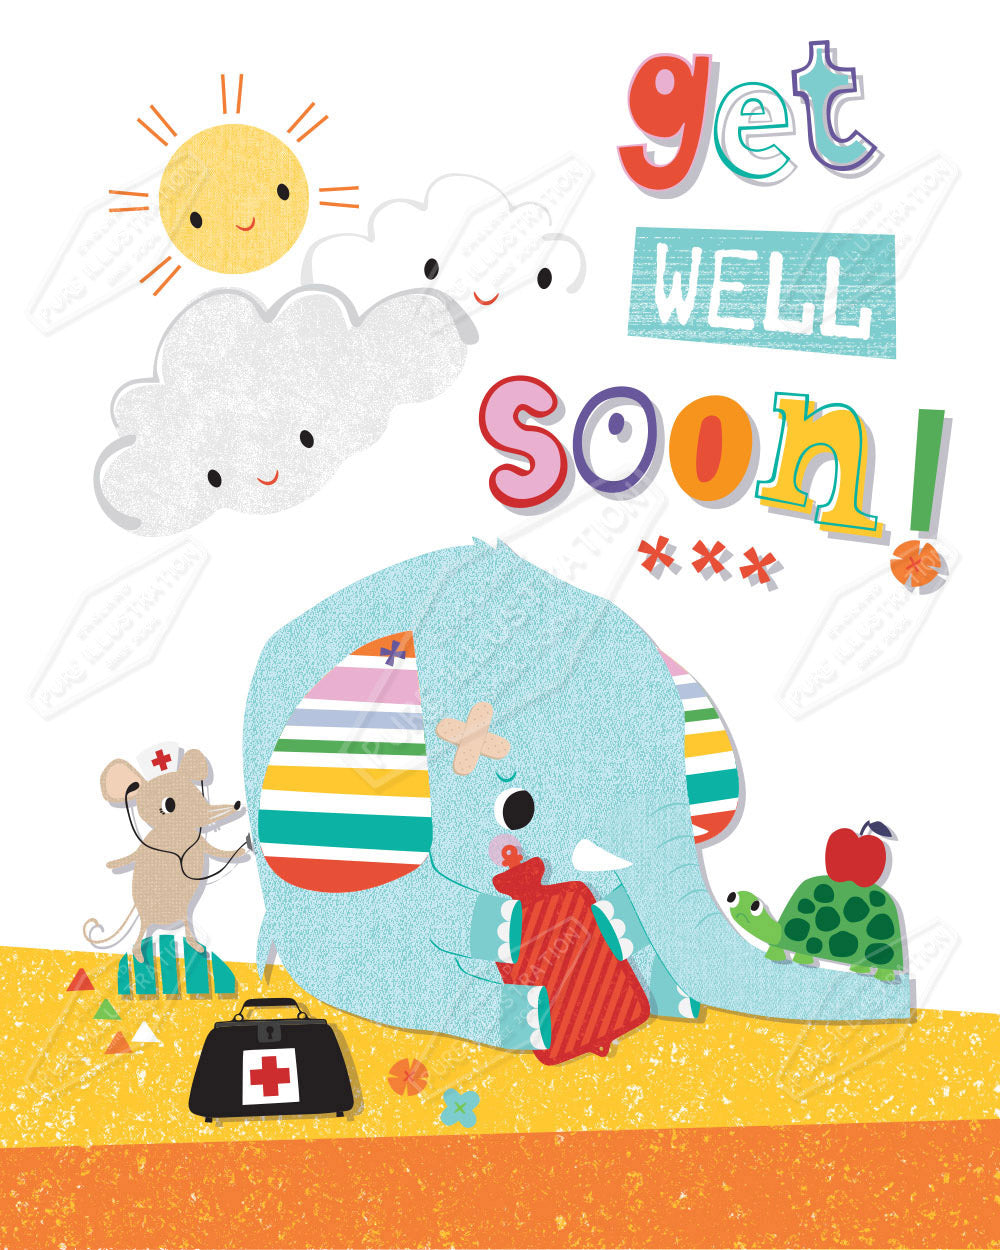 Children's Get Well Design by Gill Eggleston for Pure Art Licensing Agency & Surface Design Studio